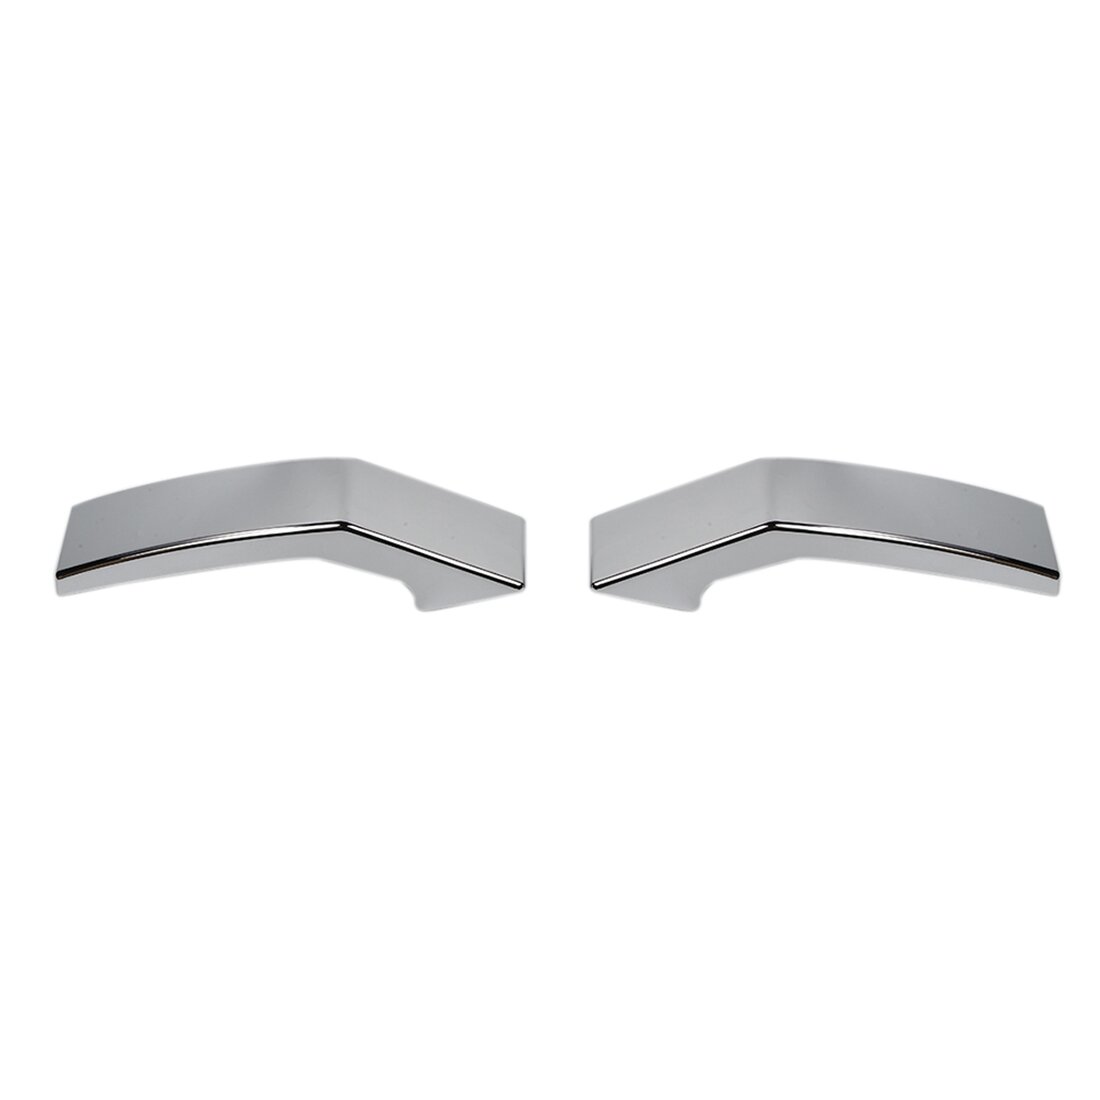 Front Bumper Grille Cover Trim Decoration Sticker for 2021 2022 Car Accessories, ABS Silver